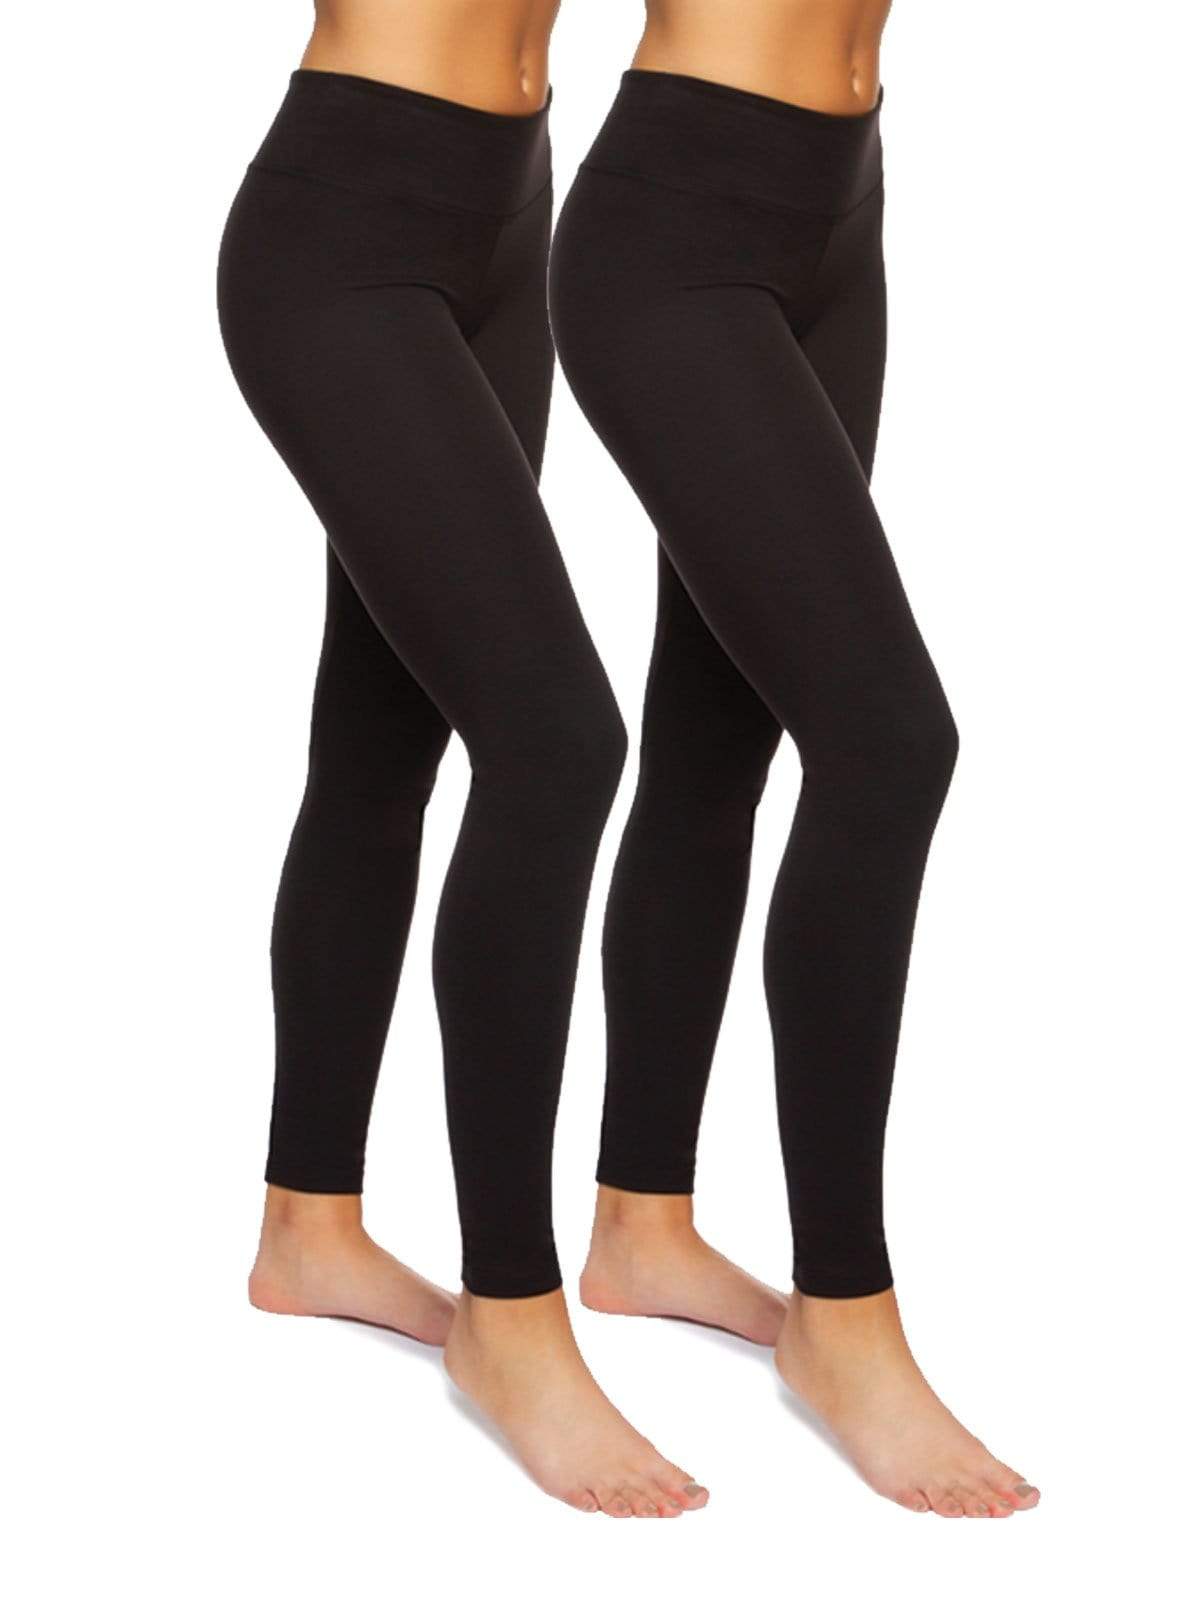 Loruna Seamless Legging with Cutouts and Stripes - Black - Babes